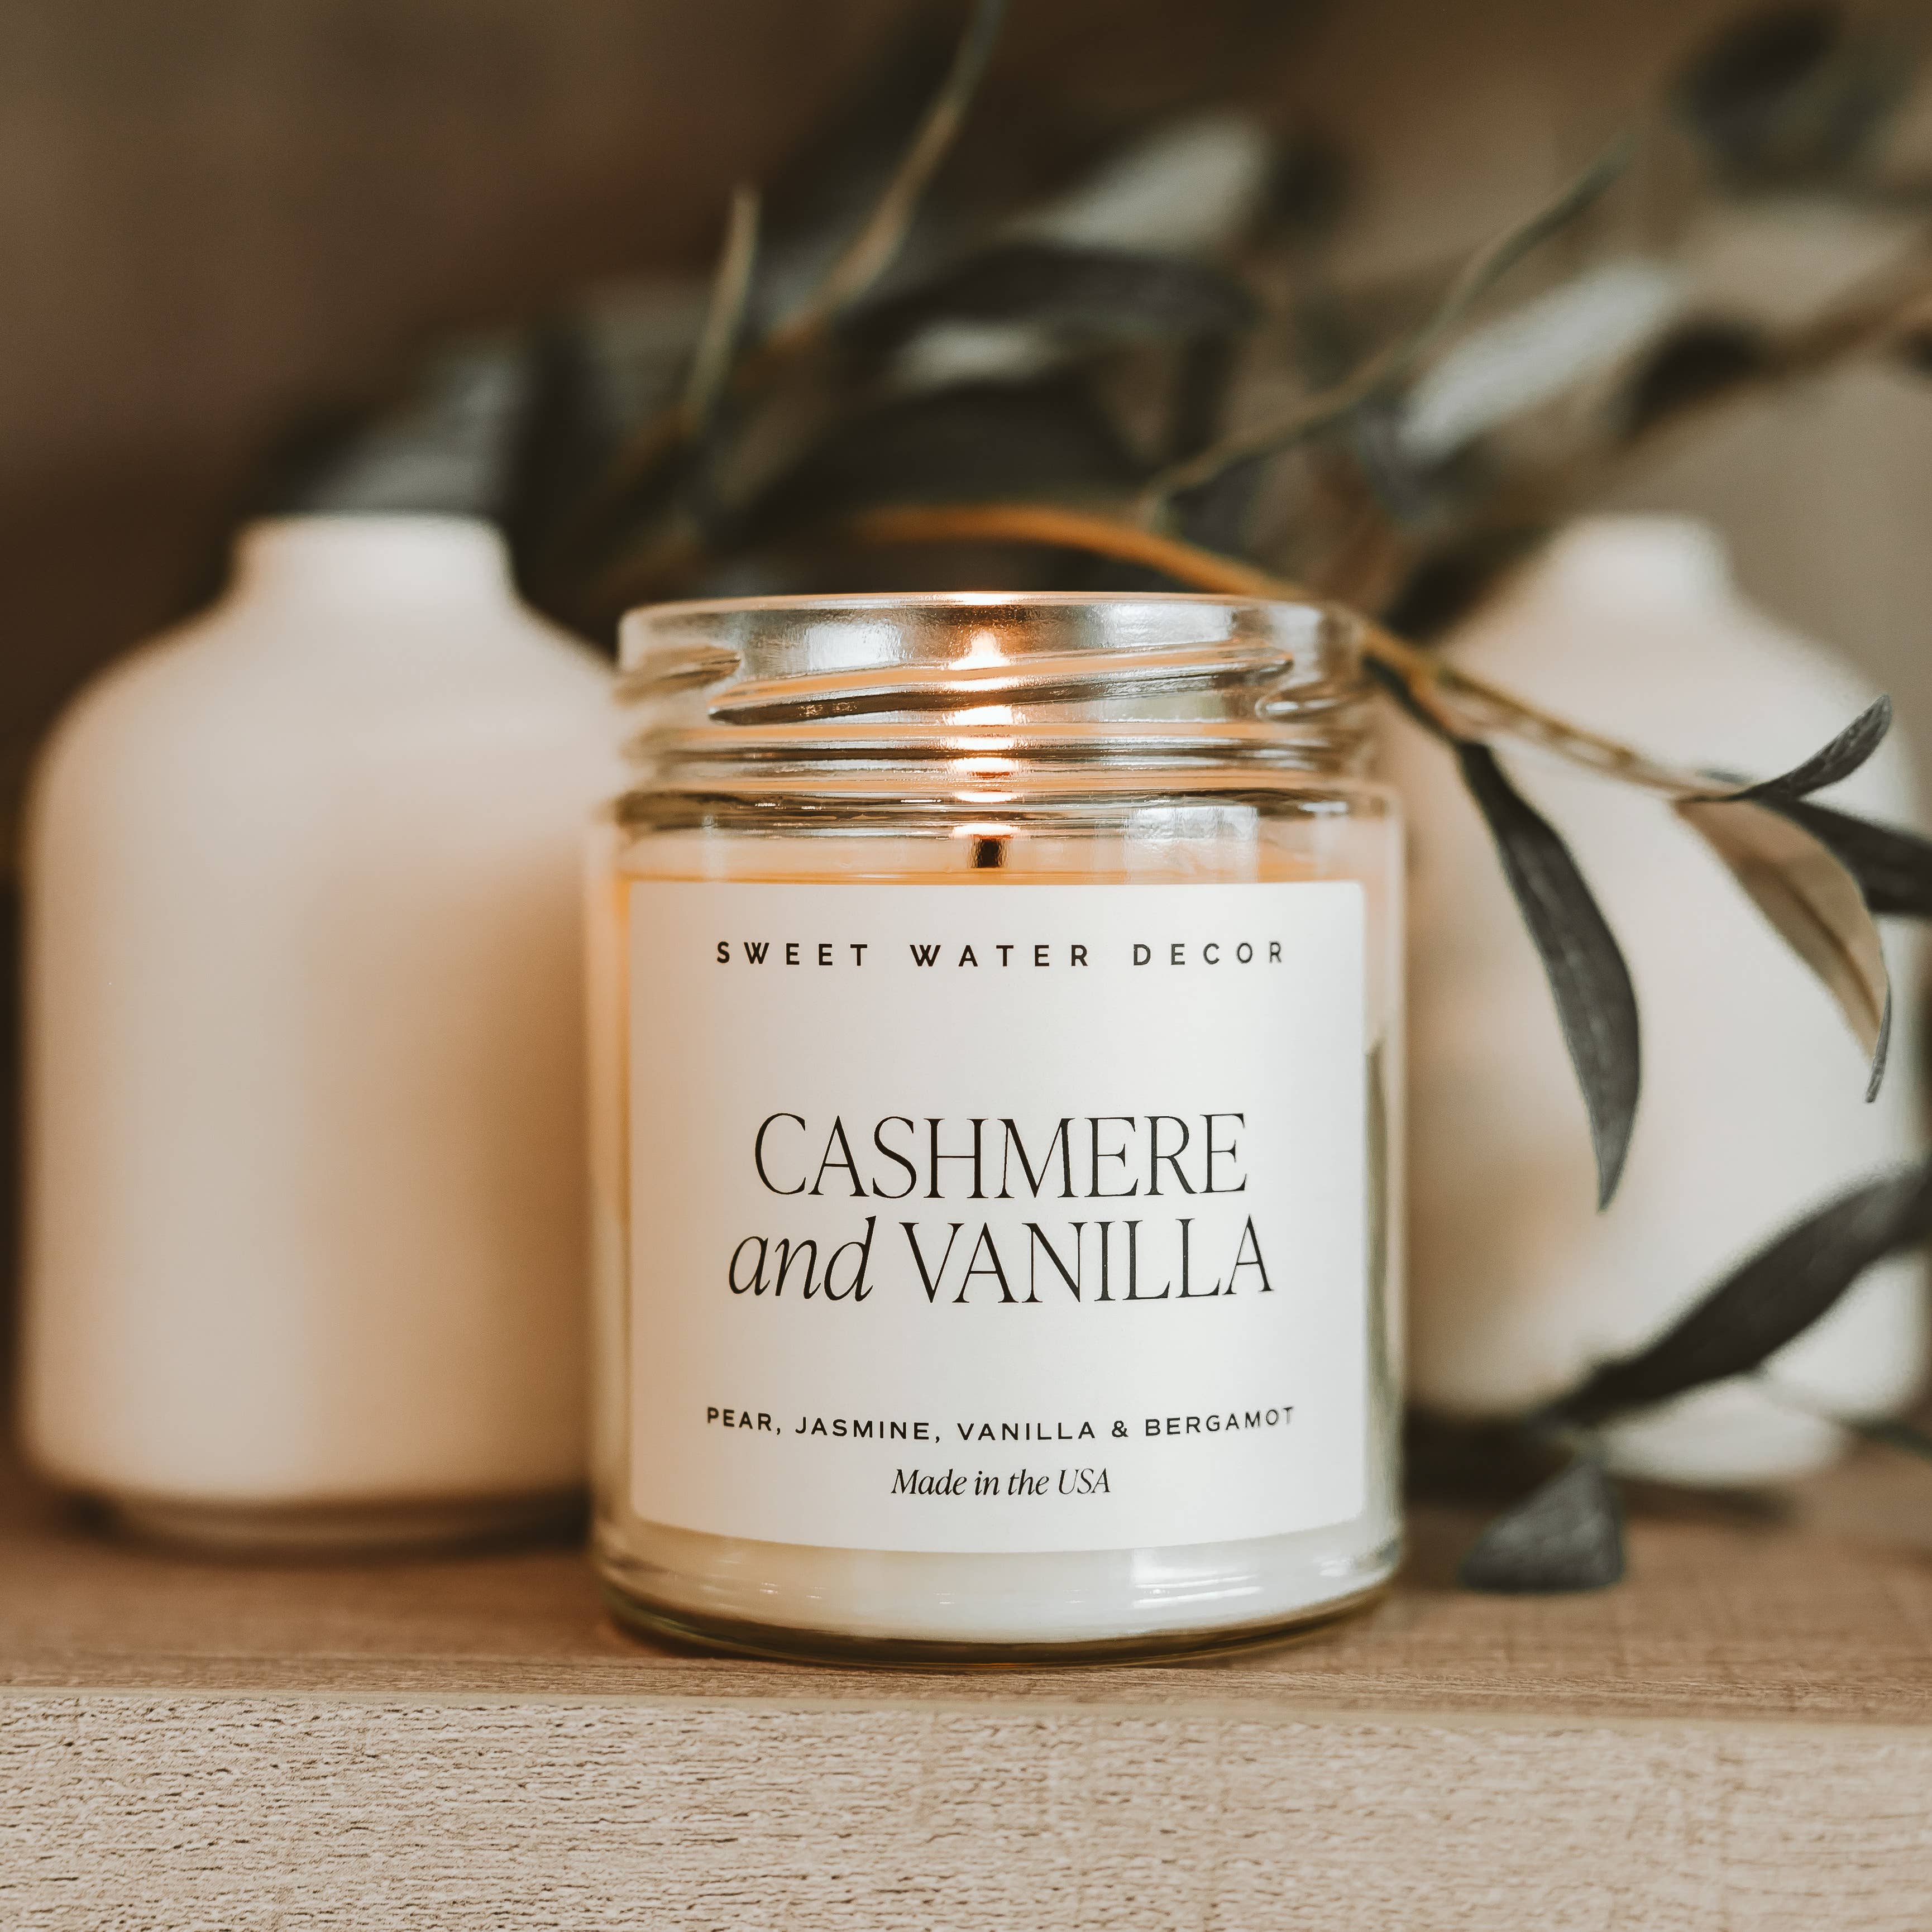 Cashmere and Vanilla 9 oz Soy Candle - Home Decor & Gifts